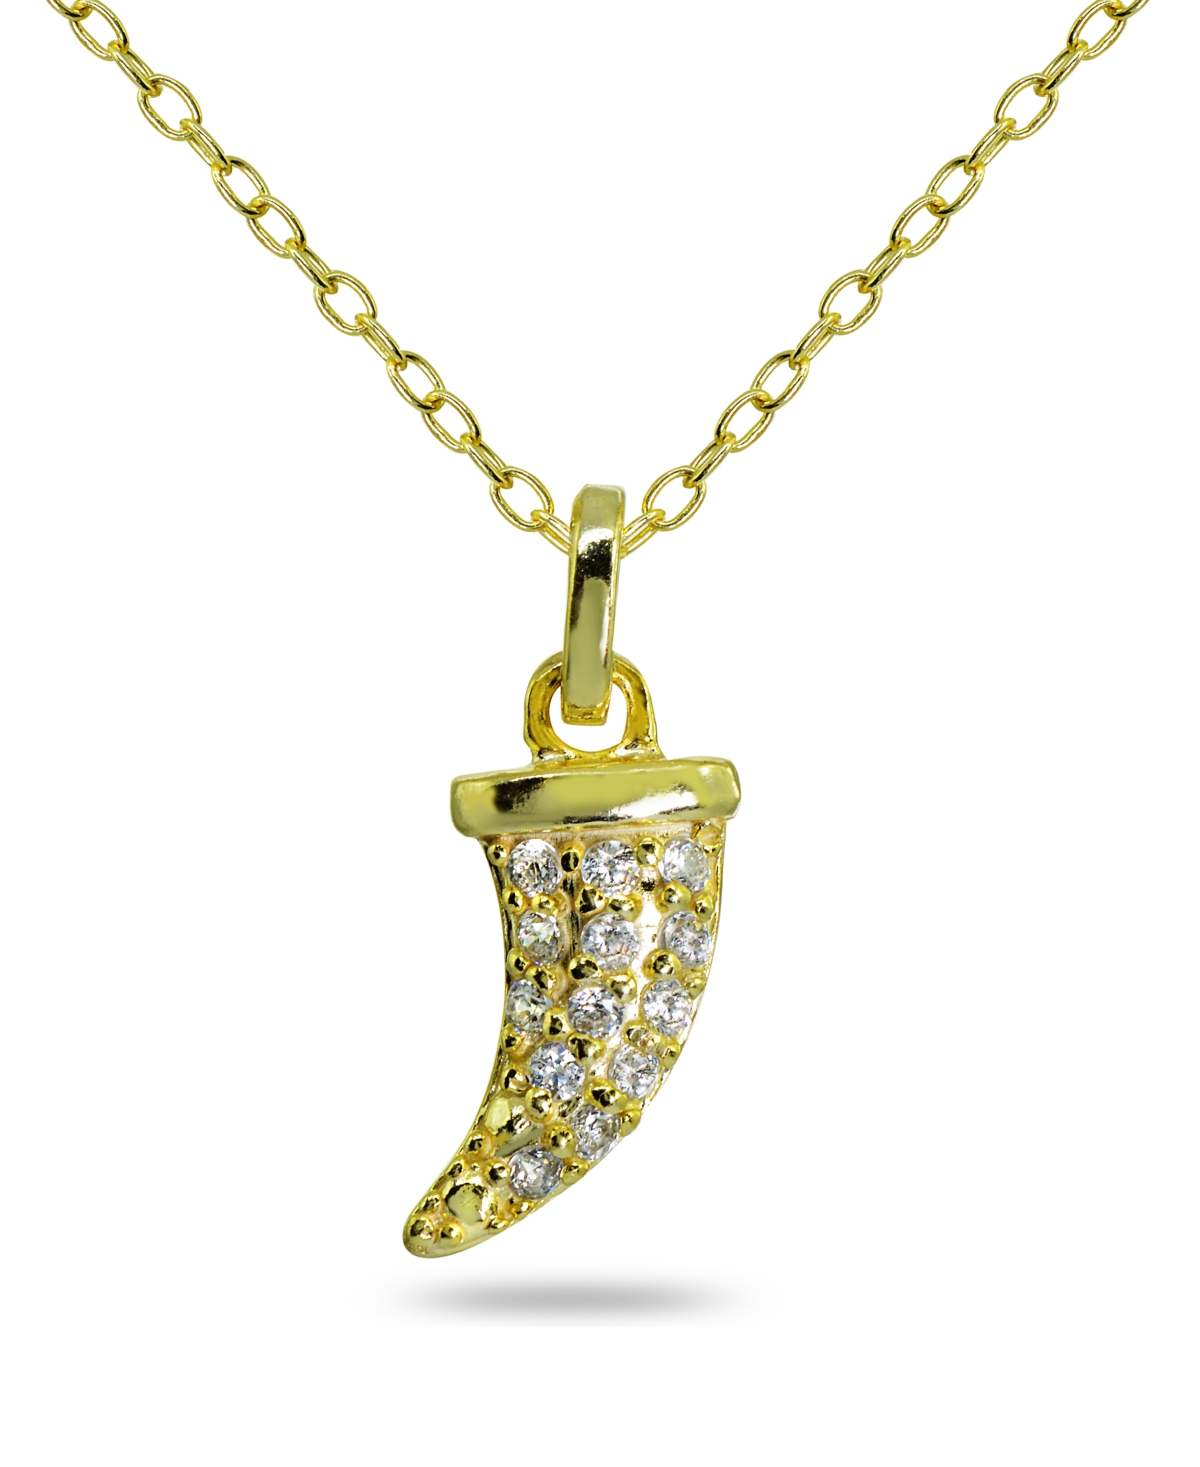 Cubic Zirconia Horn Pendant in 18k Gold Plated Sterling Silver - Gold